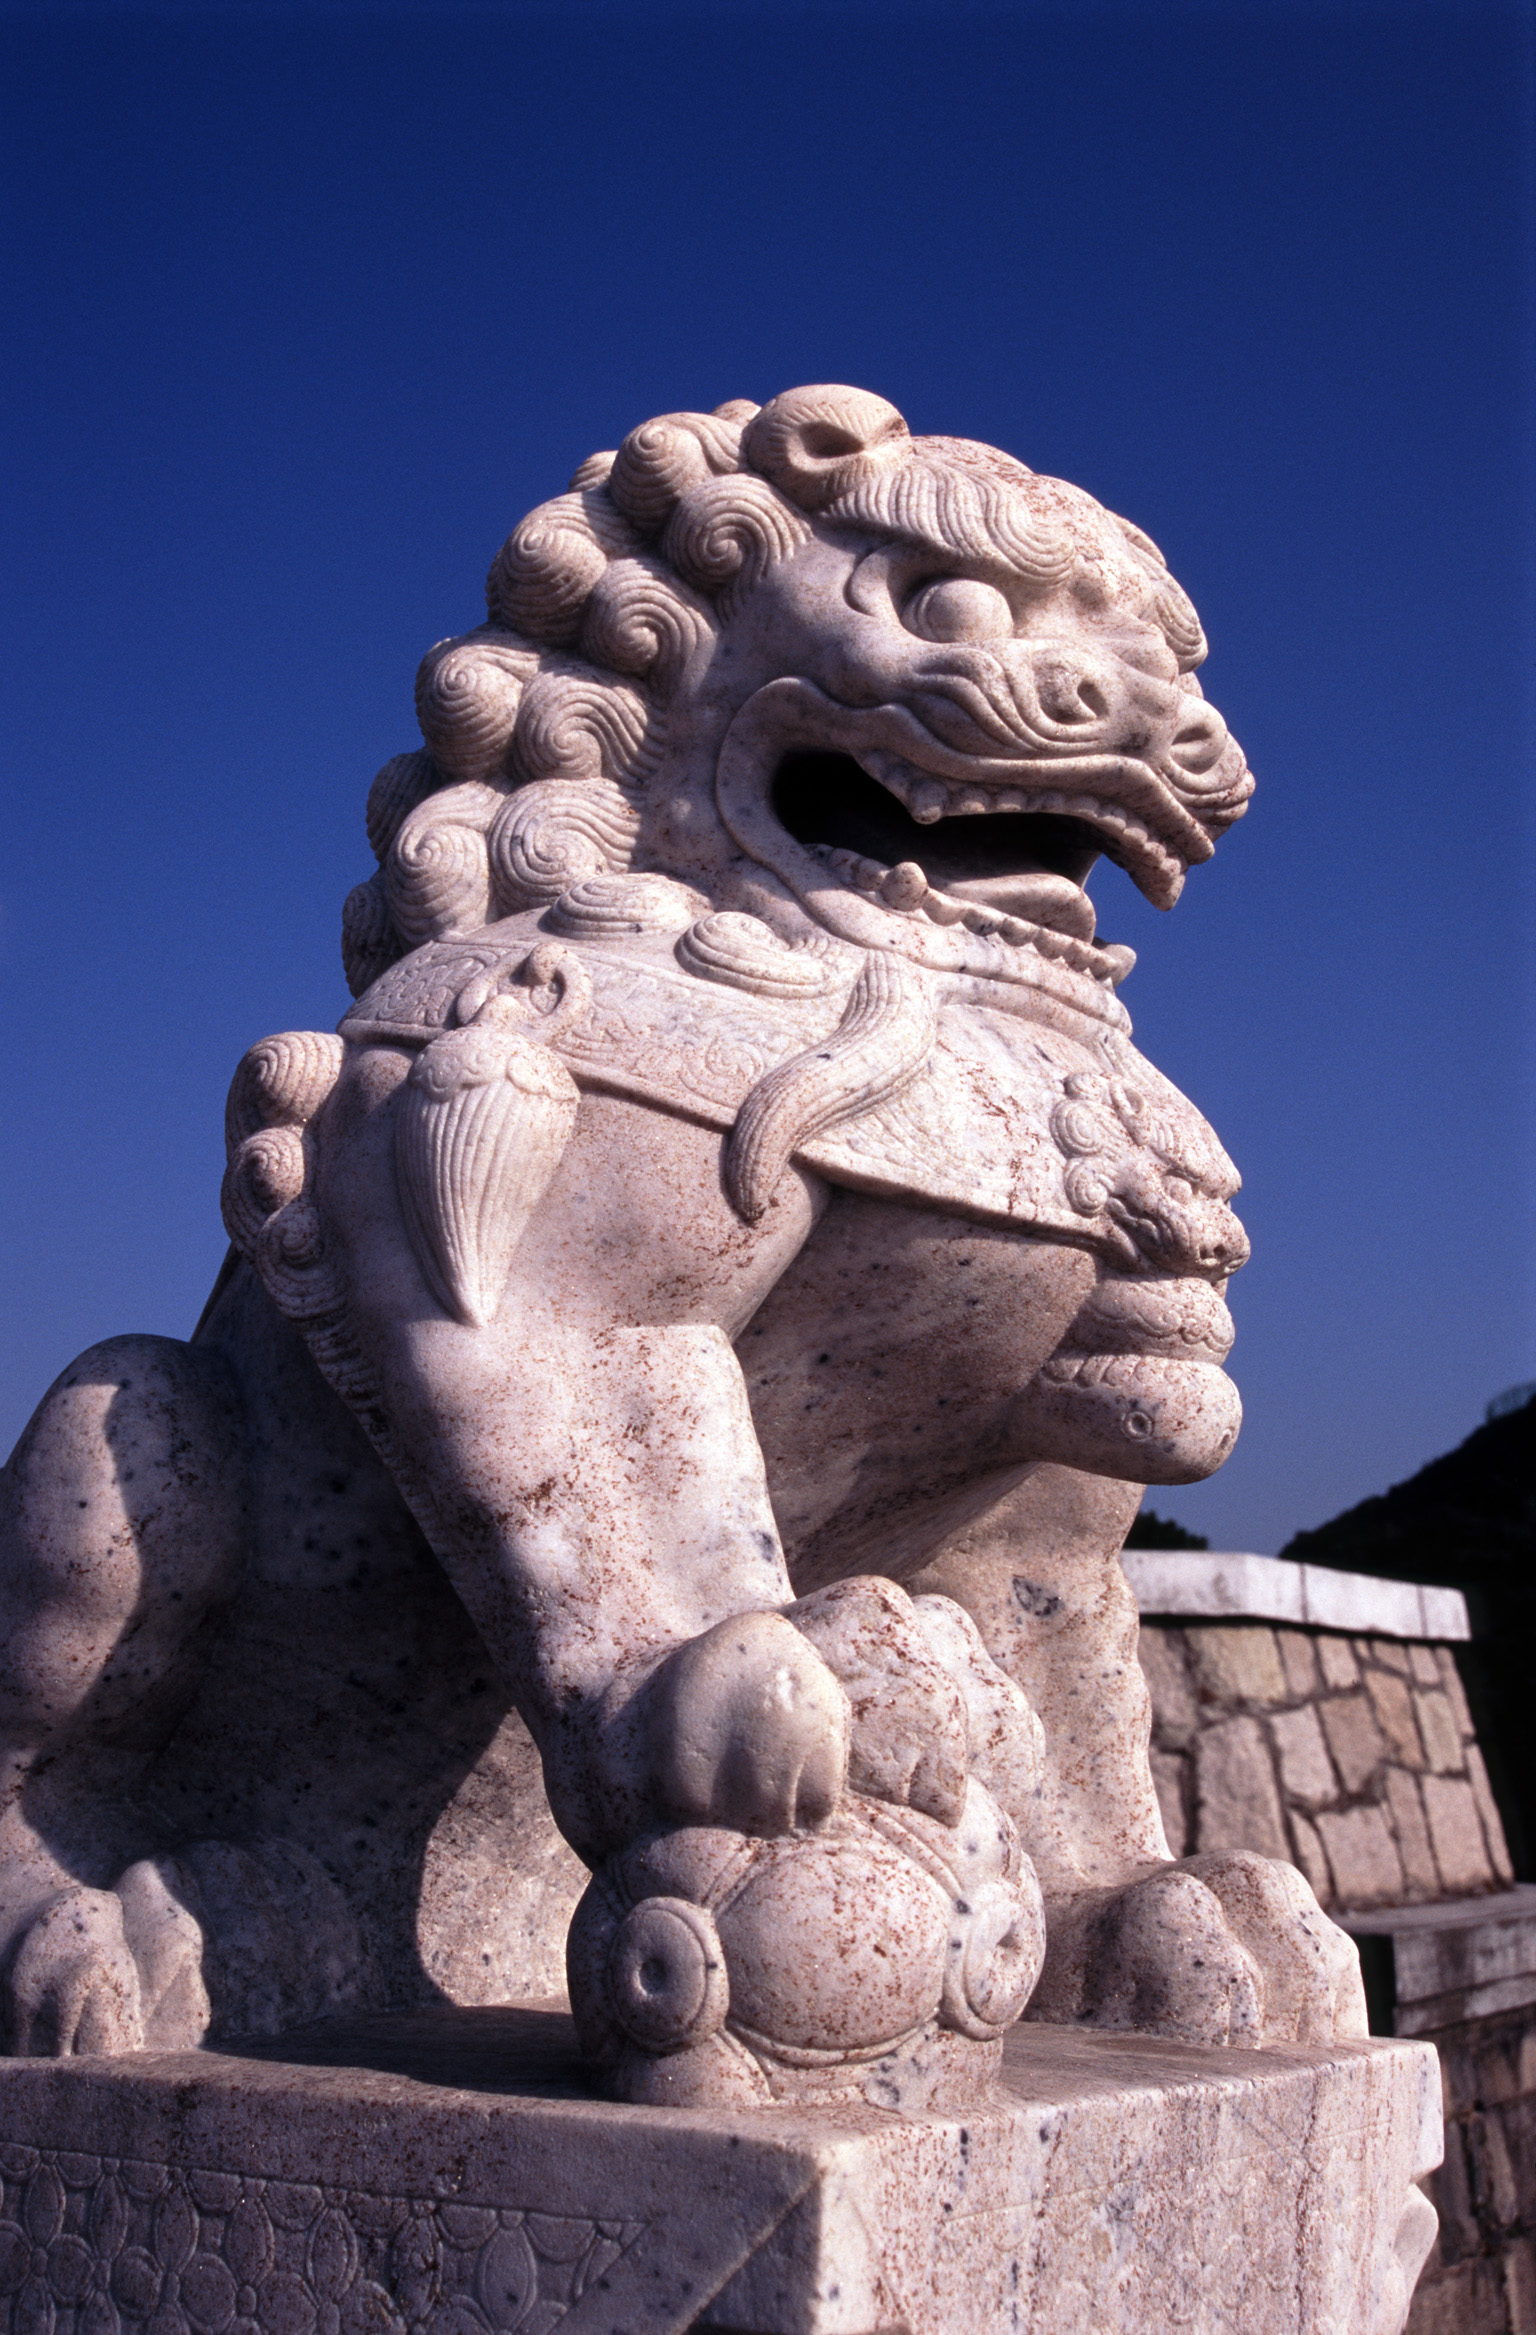 Free Stock photo of Lucky Chinese Lion Sculpture | Photoeverywhere